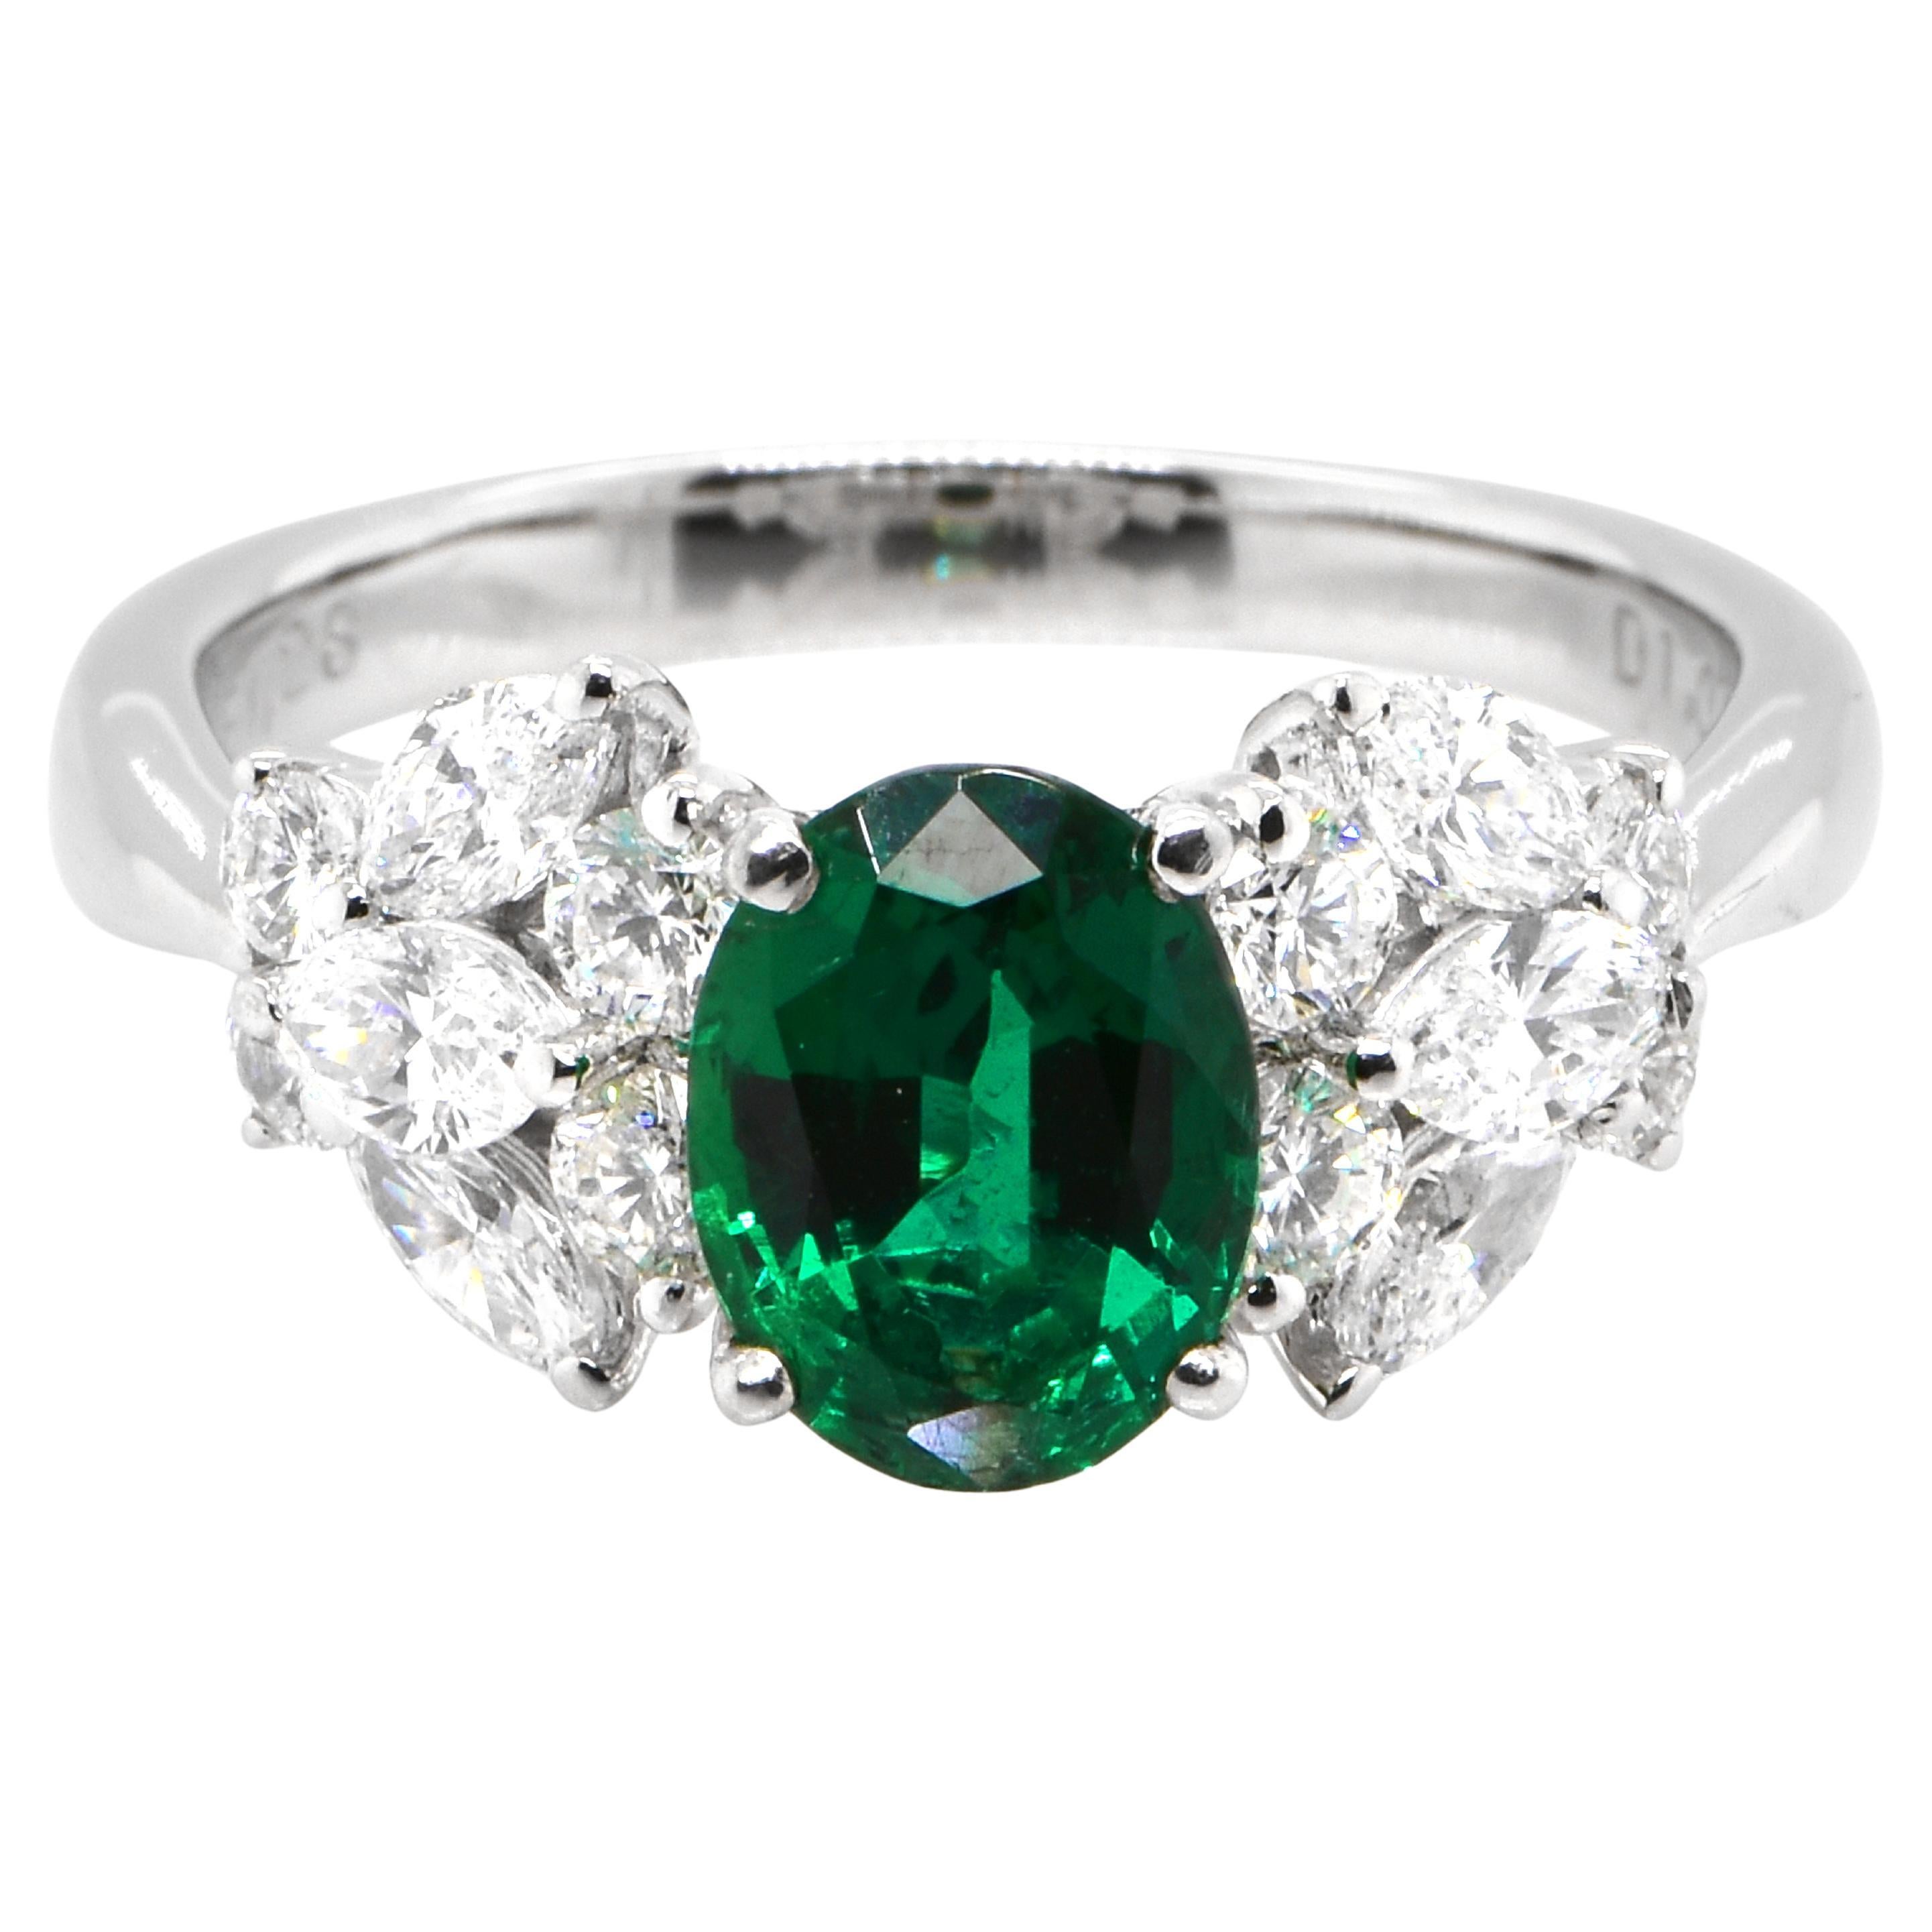 1.28 Carat Natural Vivid Green Emerald and Diamond Ring Made in Platinum For Sale